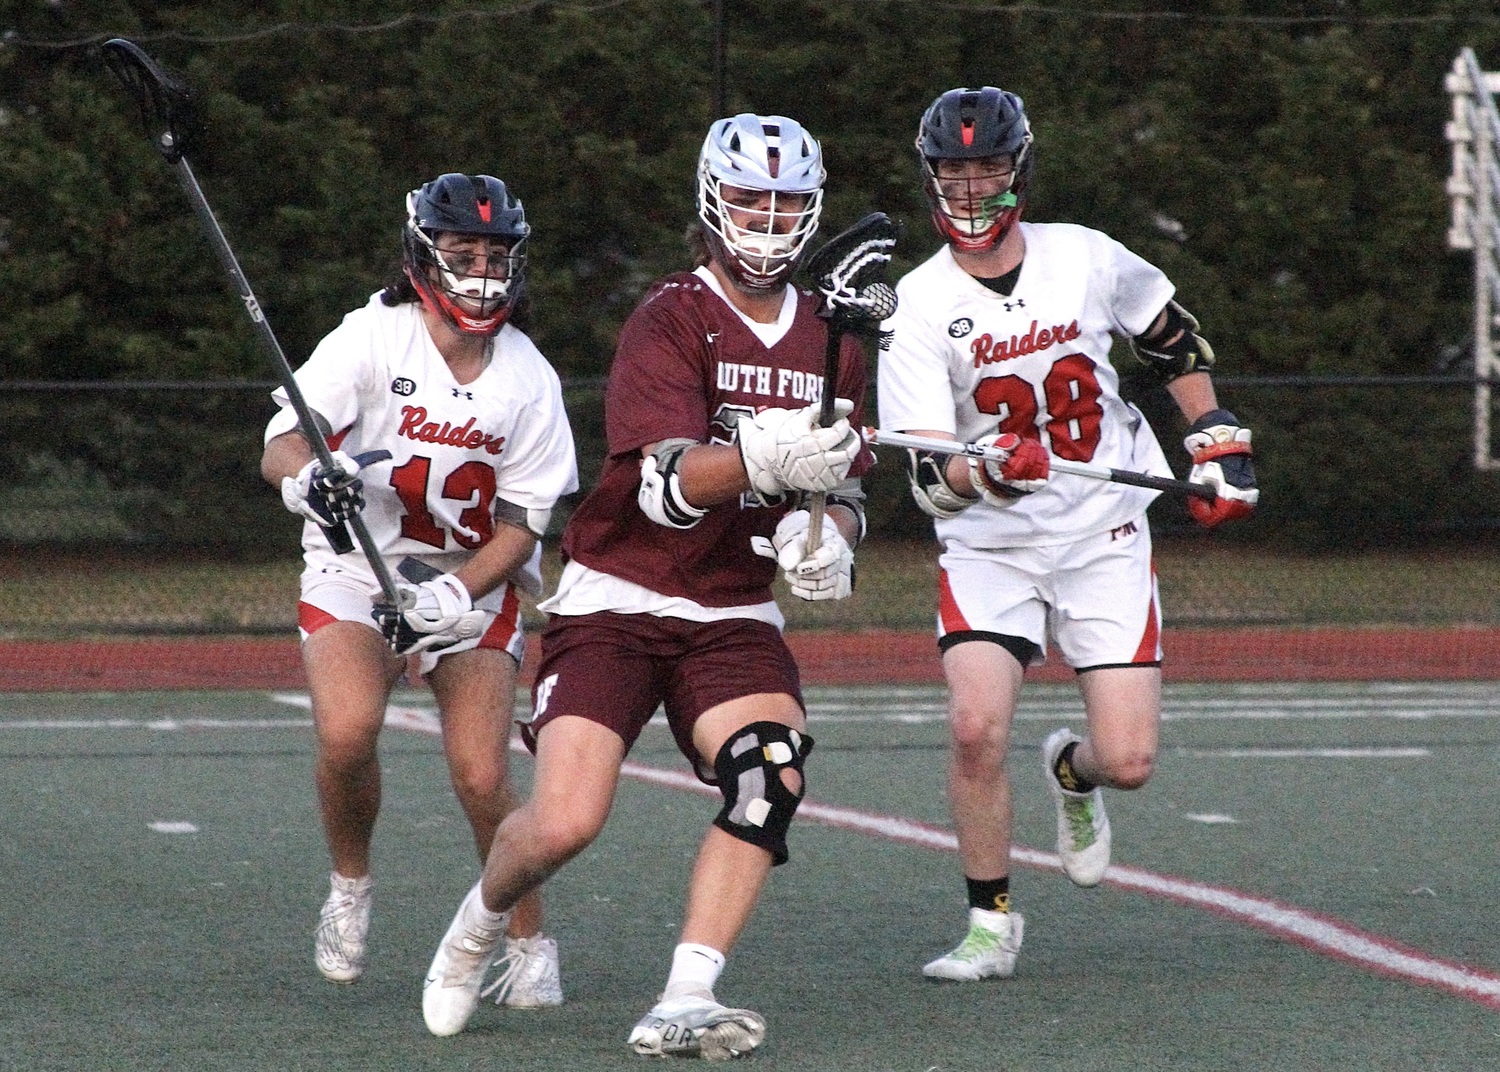 Junior midfielder Charlie Corwin grabs the ball with two Patchogue-Medford defenders on his back. DESIRÉE KEEGAN